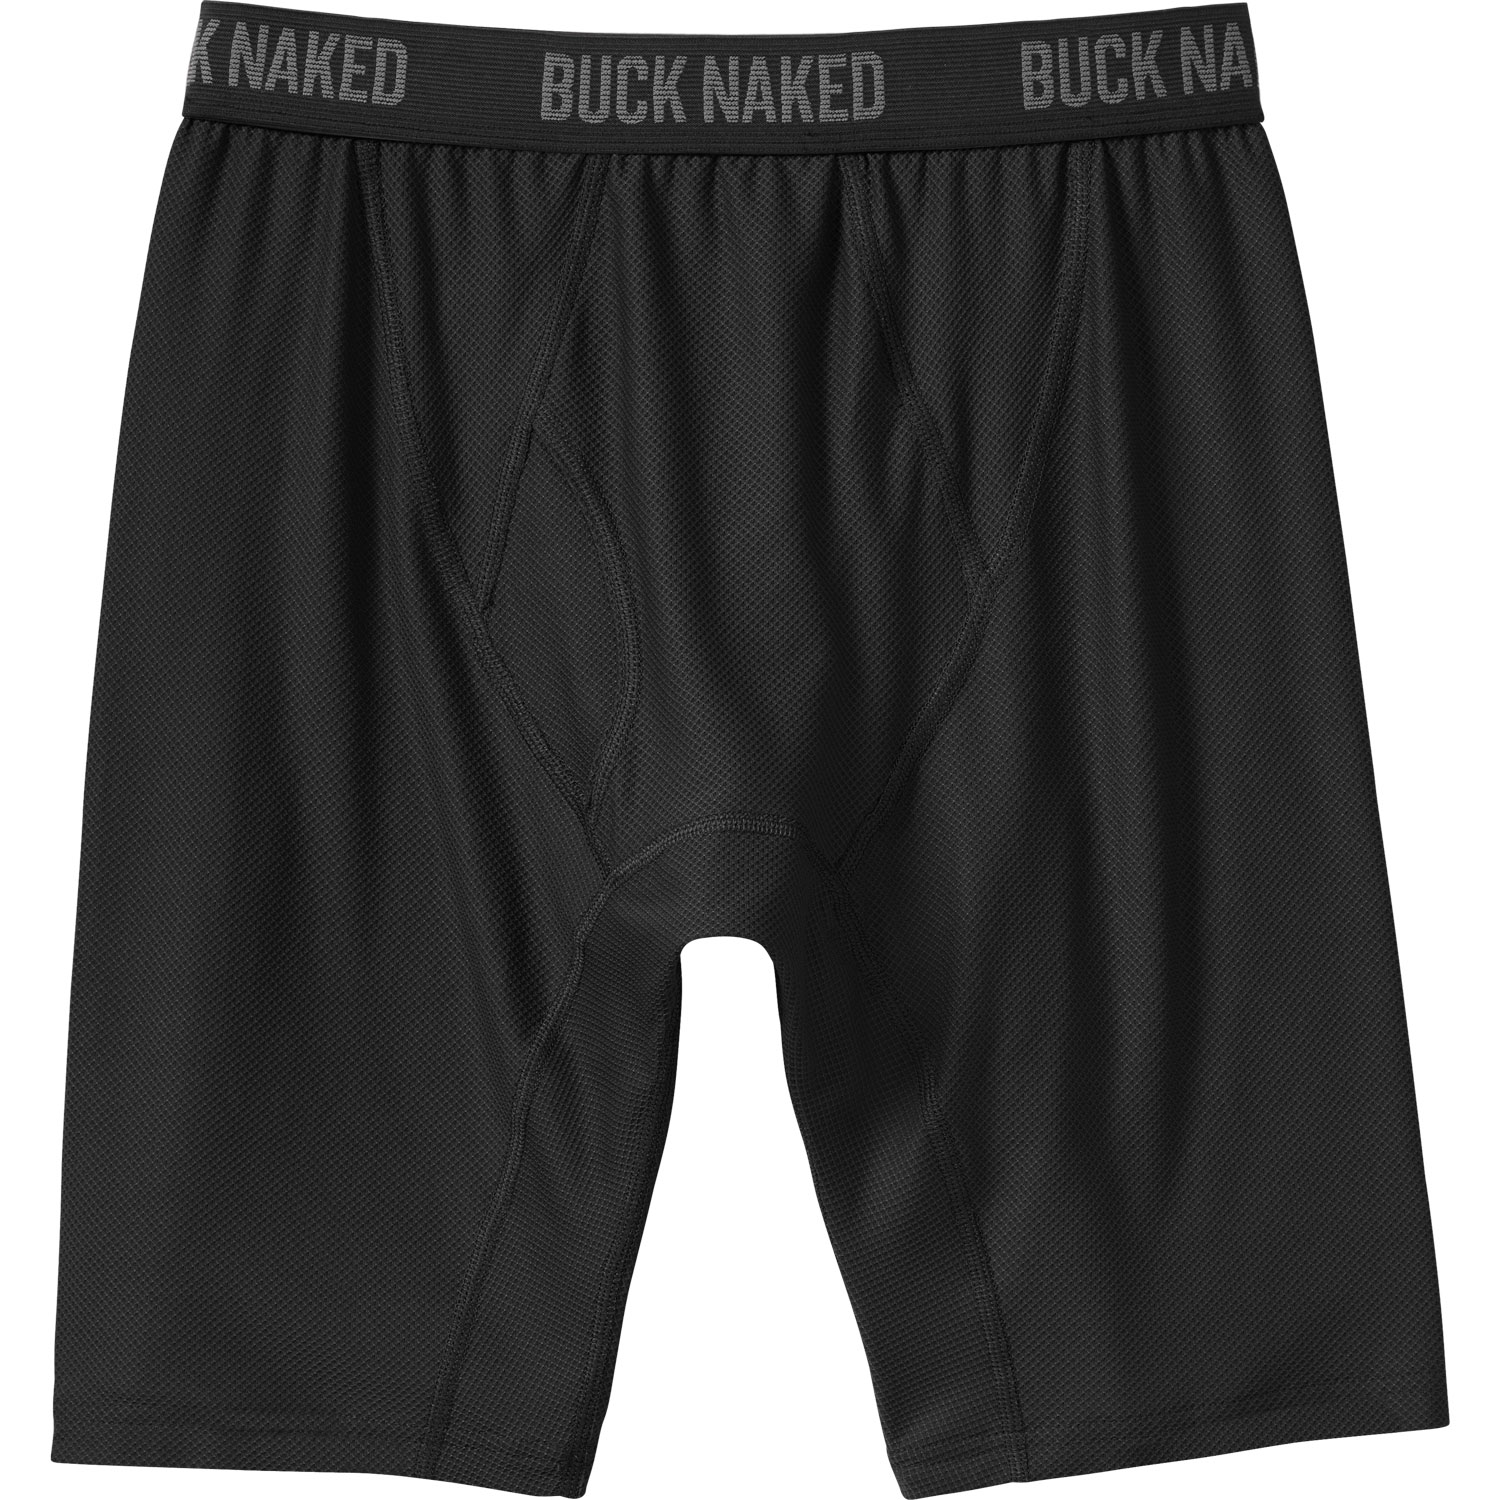 DULUTH TRADING COMPANY Men's Buck Naked Underwear Boxer Brief 4XL